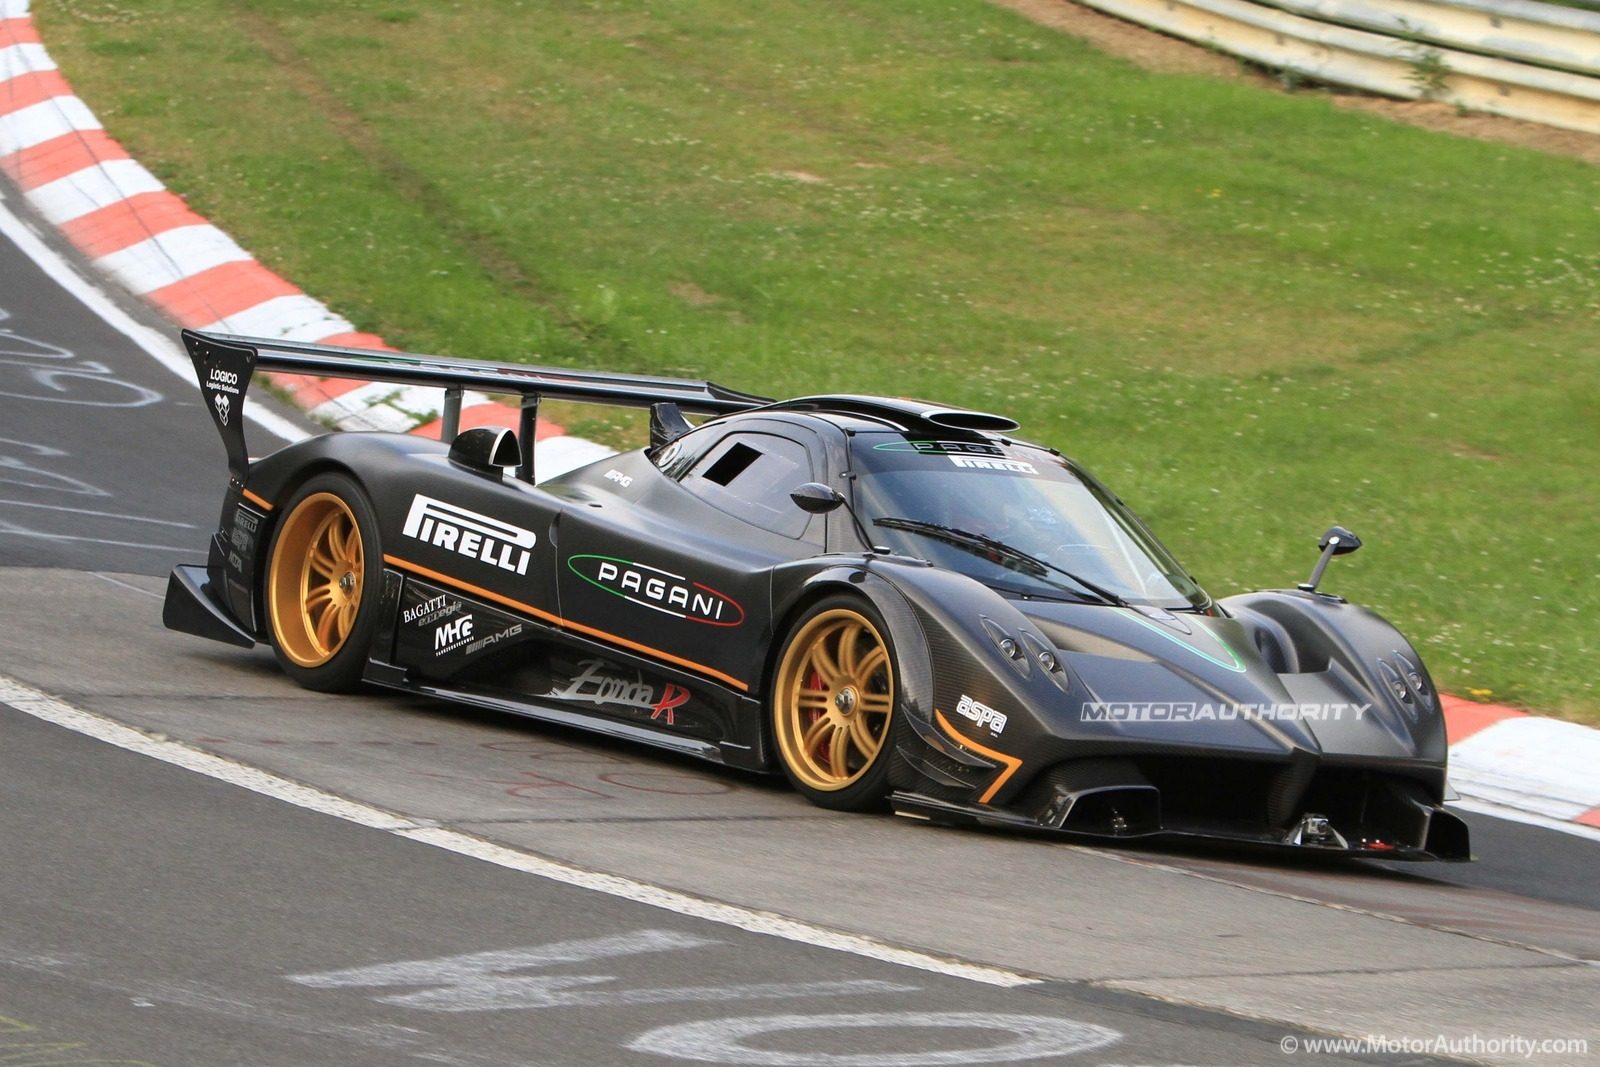 pagani-zonda-r-spied-on-the-ring-setting-new-647-lap-time_100315242_h.jpg